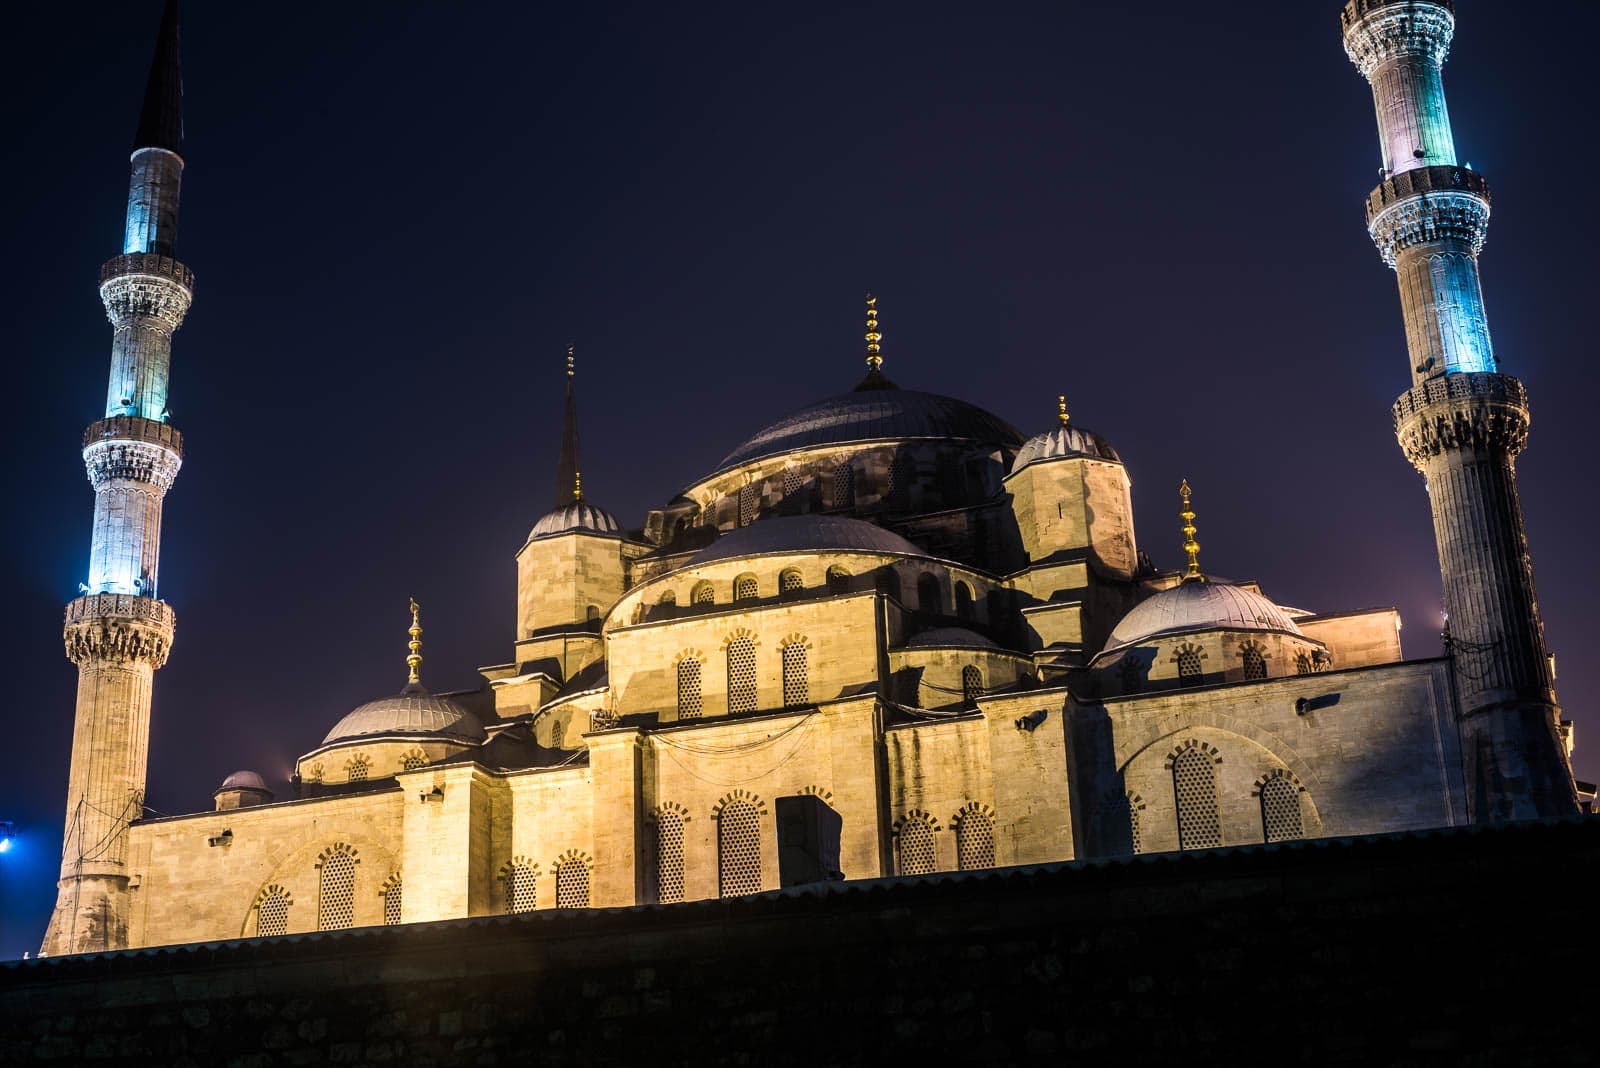 The blue mosque lit up at night.